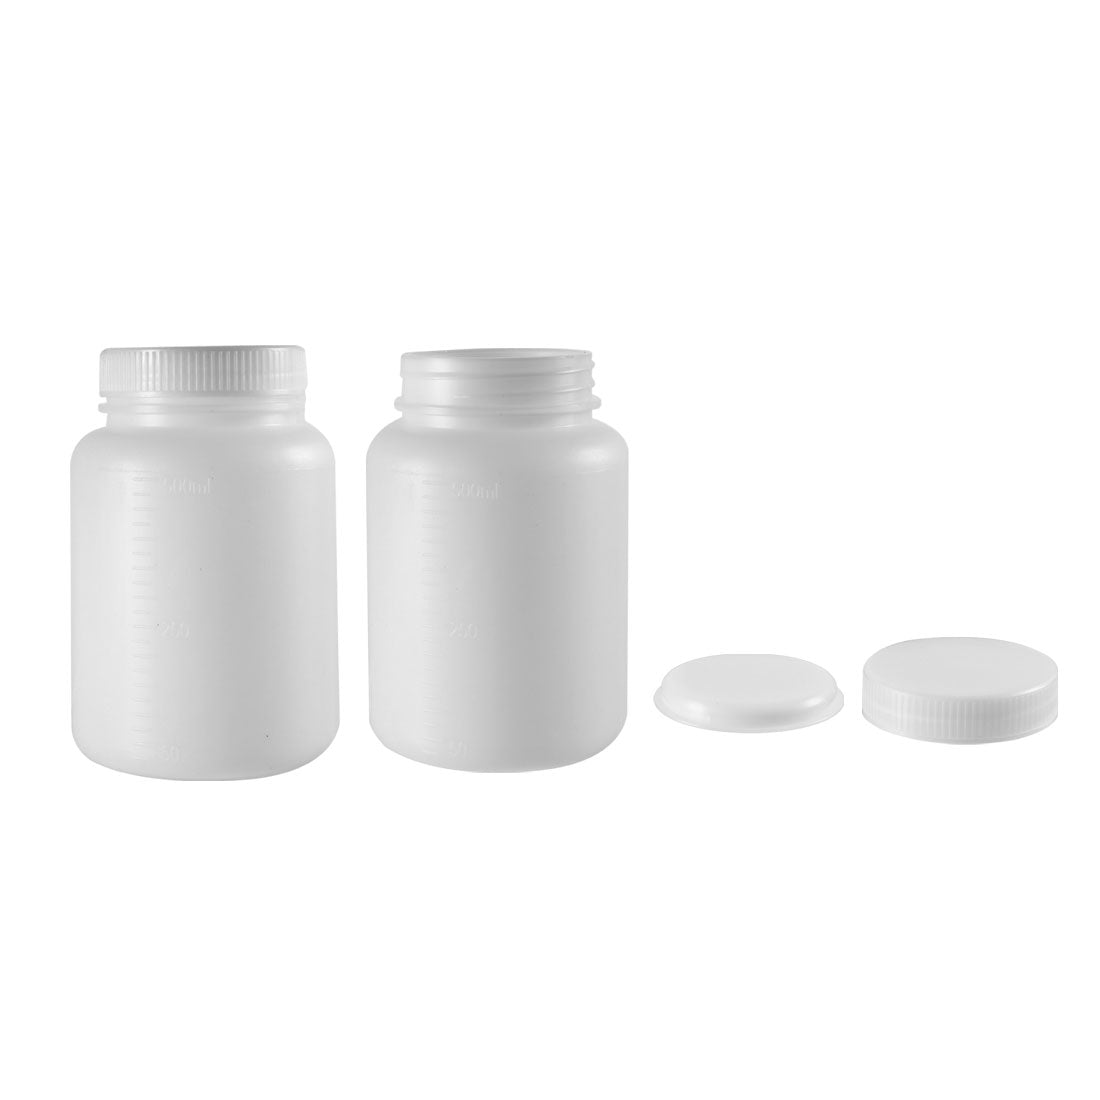 Uxcell Uxcell Plastic Lab Chemical Reagent Bottle 500ml/16.9oz Wide Mouth Sample Sealing Liquid Storage Container 2pcs